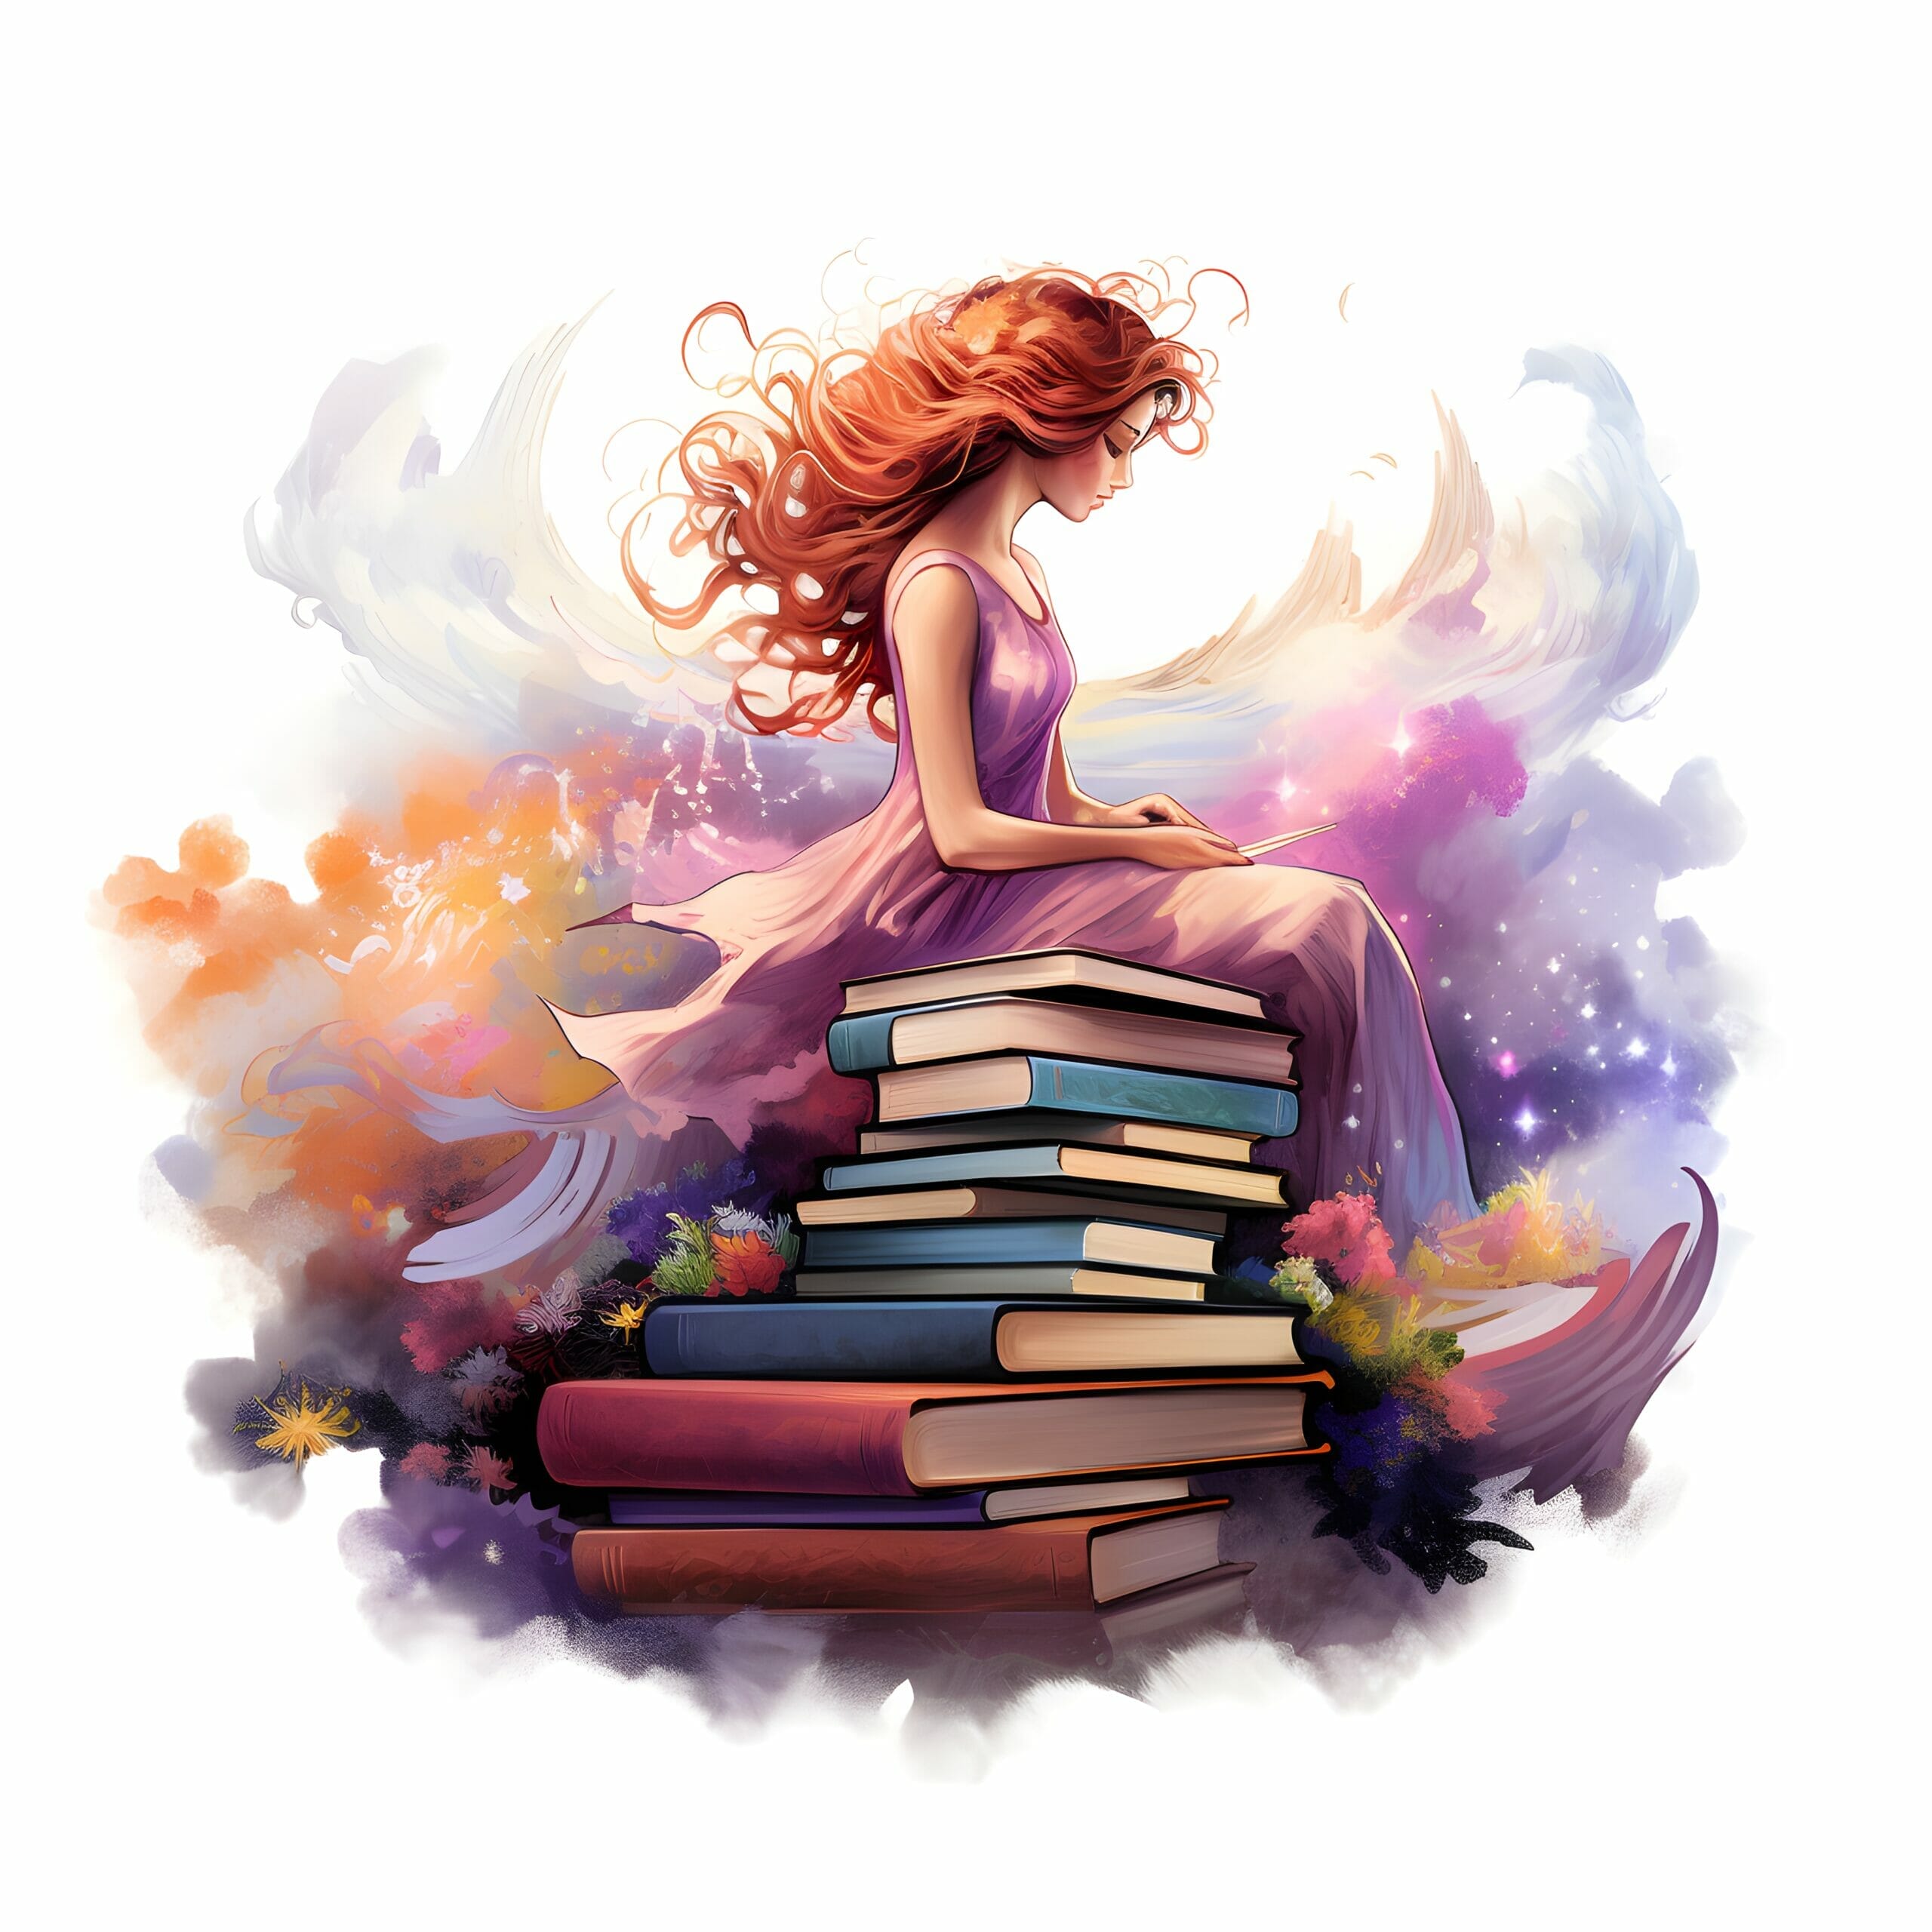 A girl perched on a tower of books.